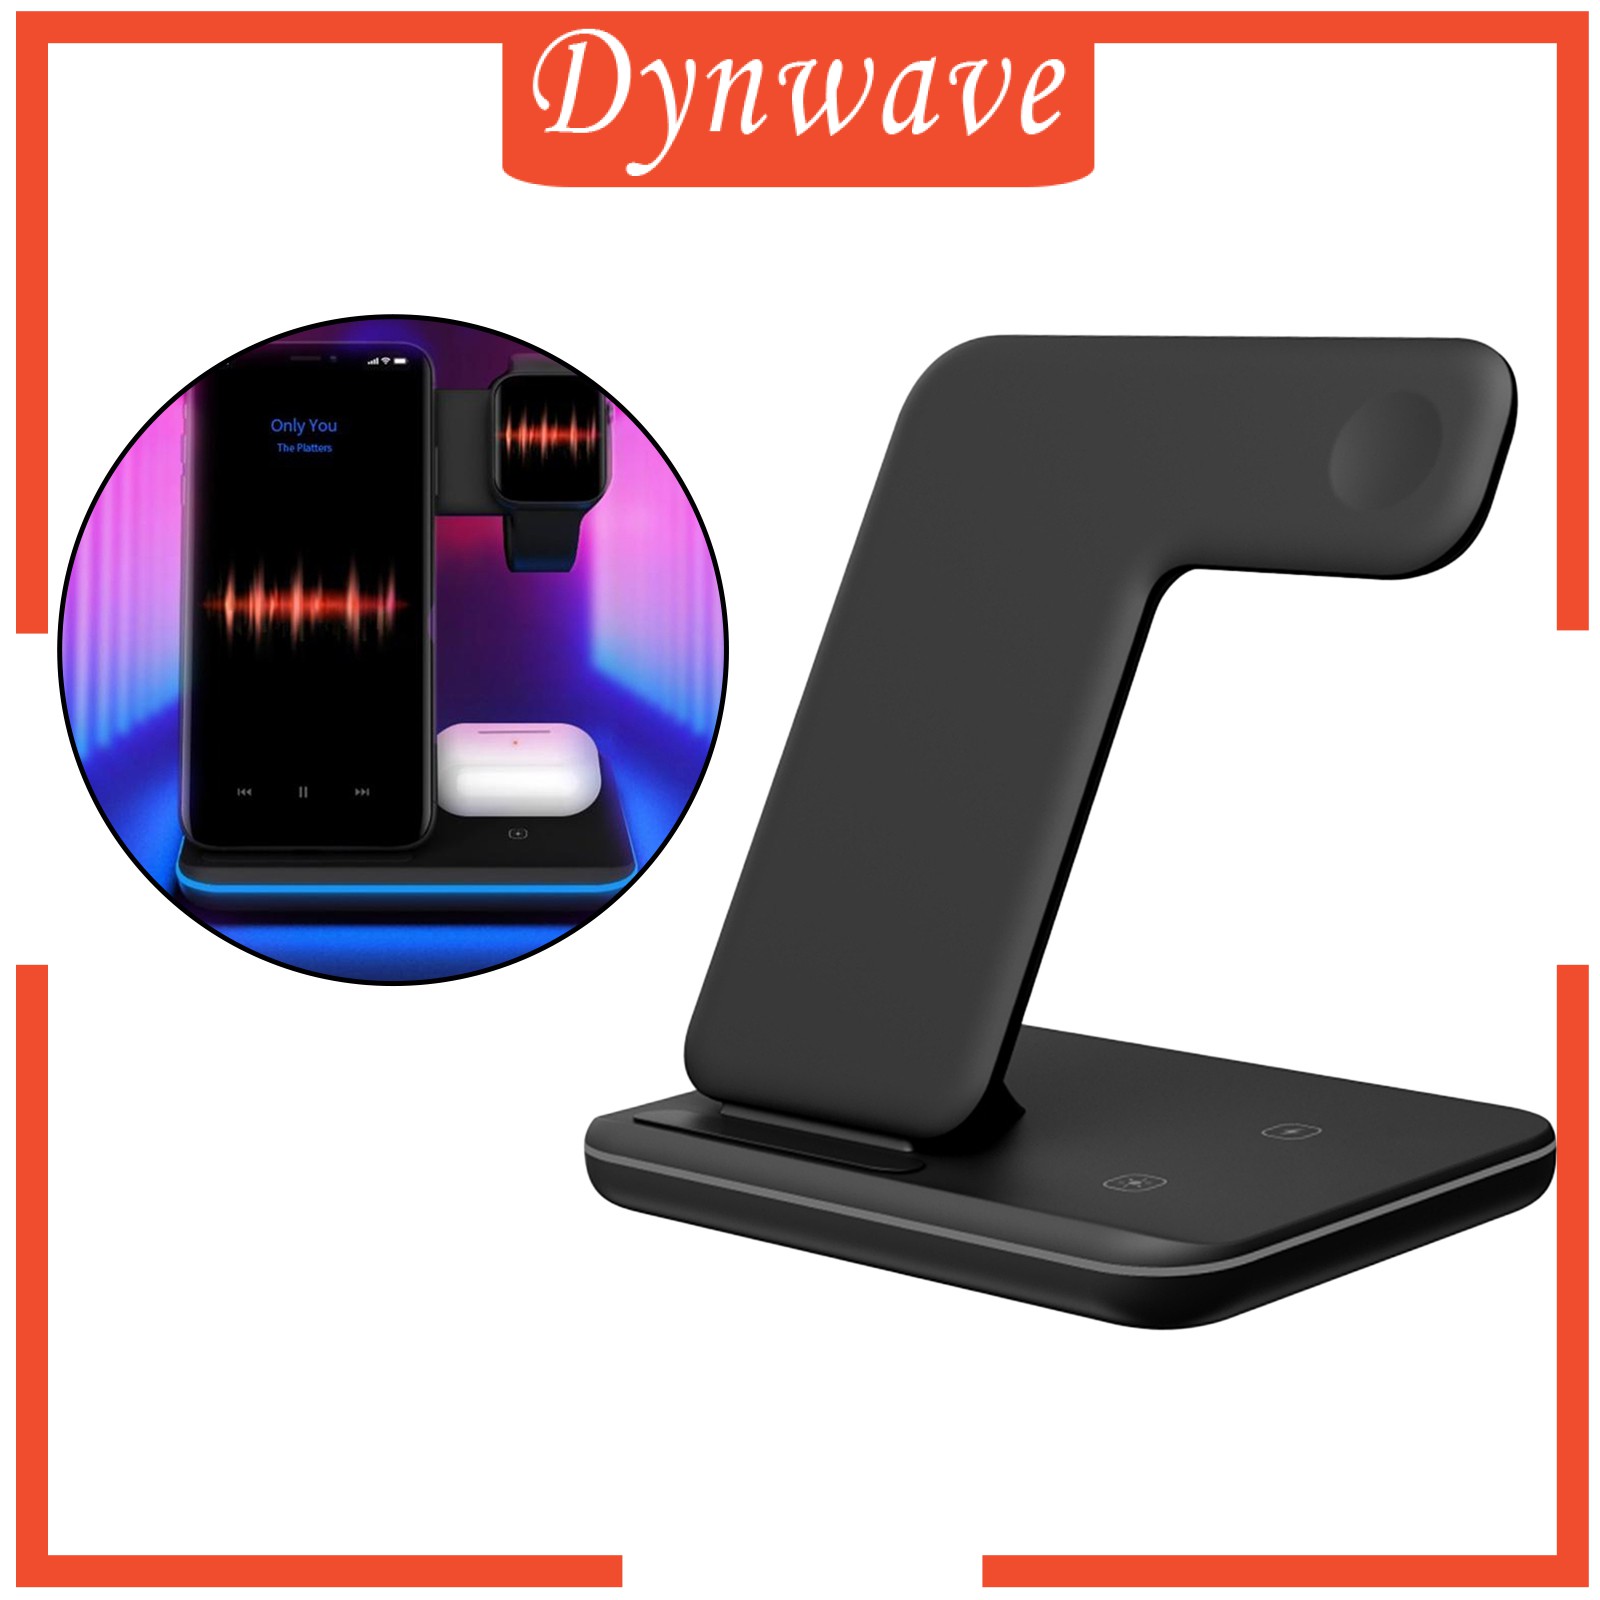 [DYNWAVE] 3 in 1 15W Wireless Fast Charging Station Charger Dock Stand for iPhone